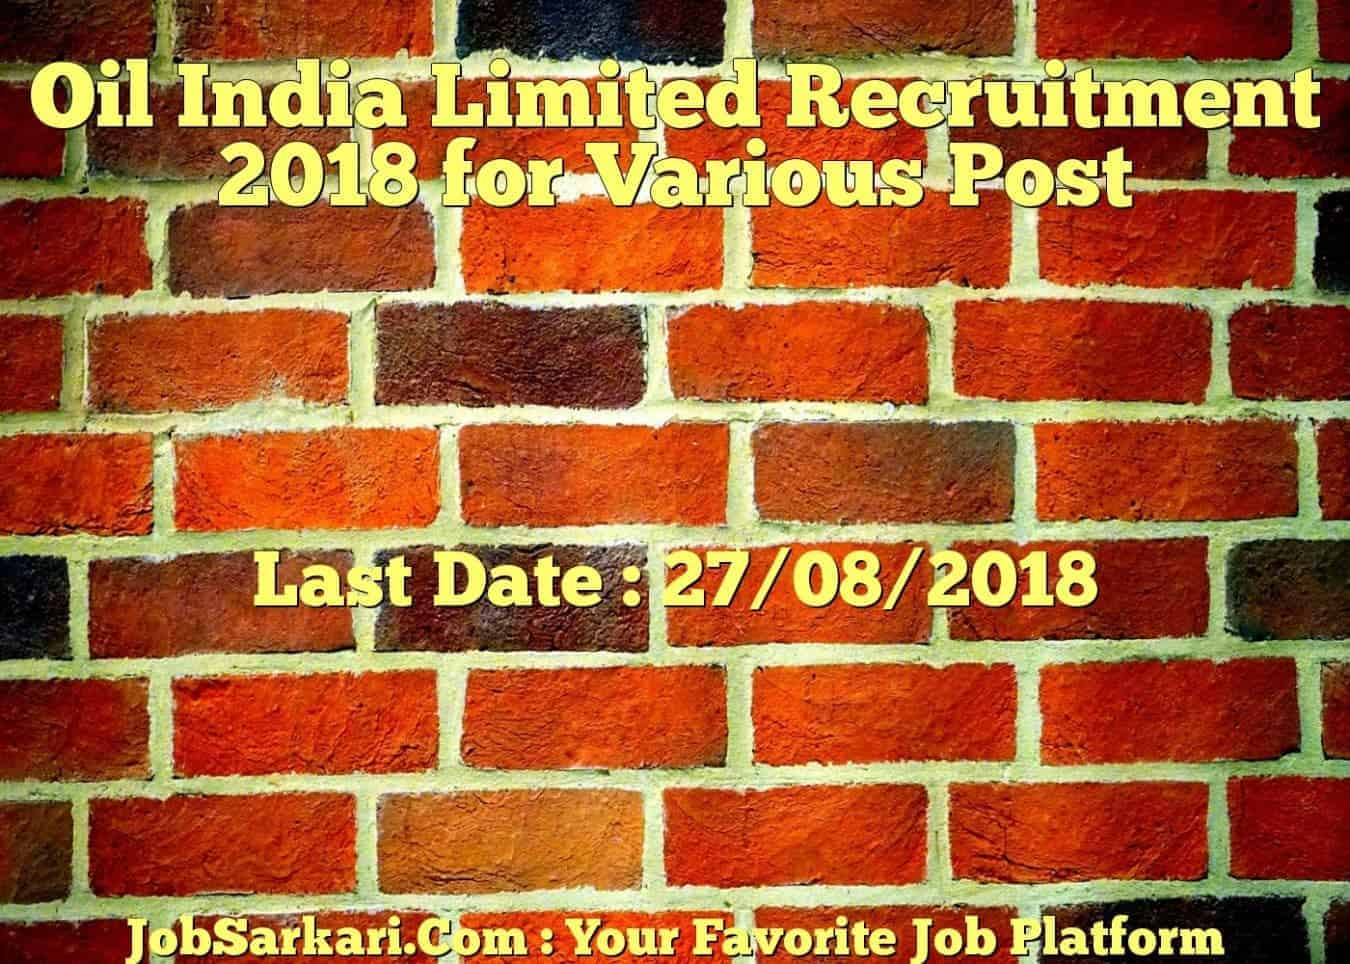 Oil India Limited Recruitment 2018 for Various Post